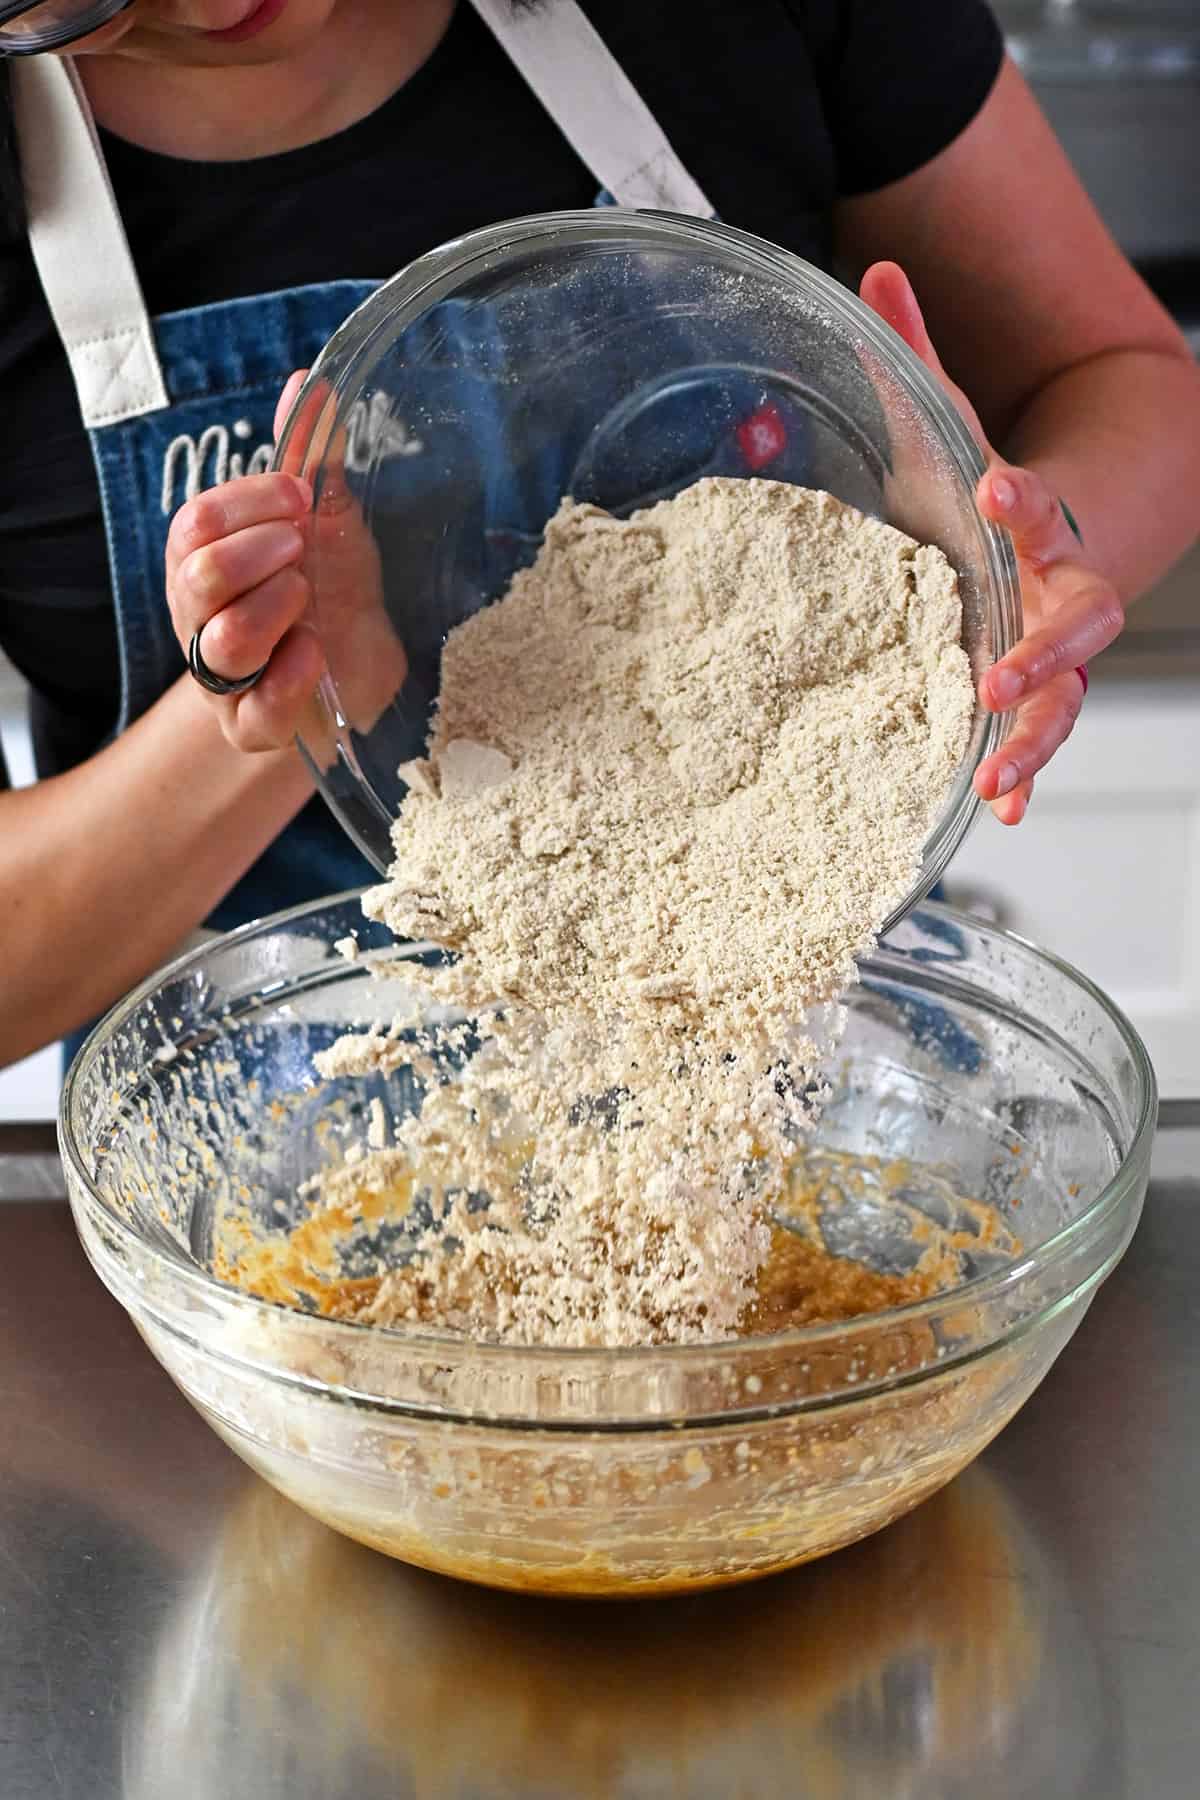 Add the bowl of dry ingredients to the glass bowl of wet ingredients to make the paleo banana cookies.